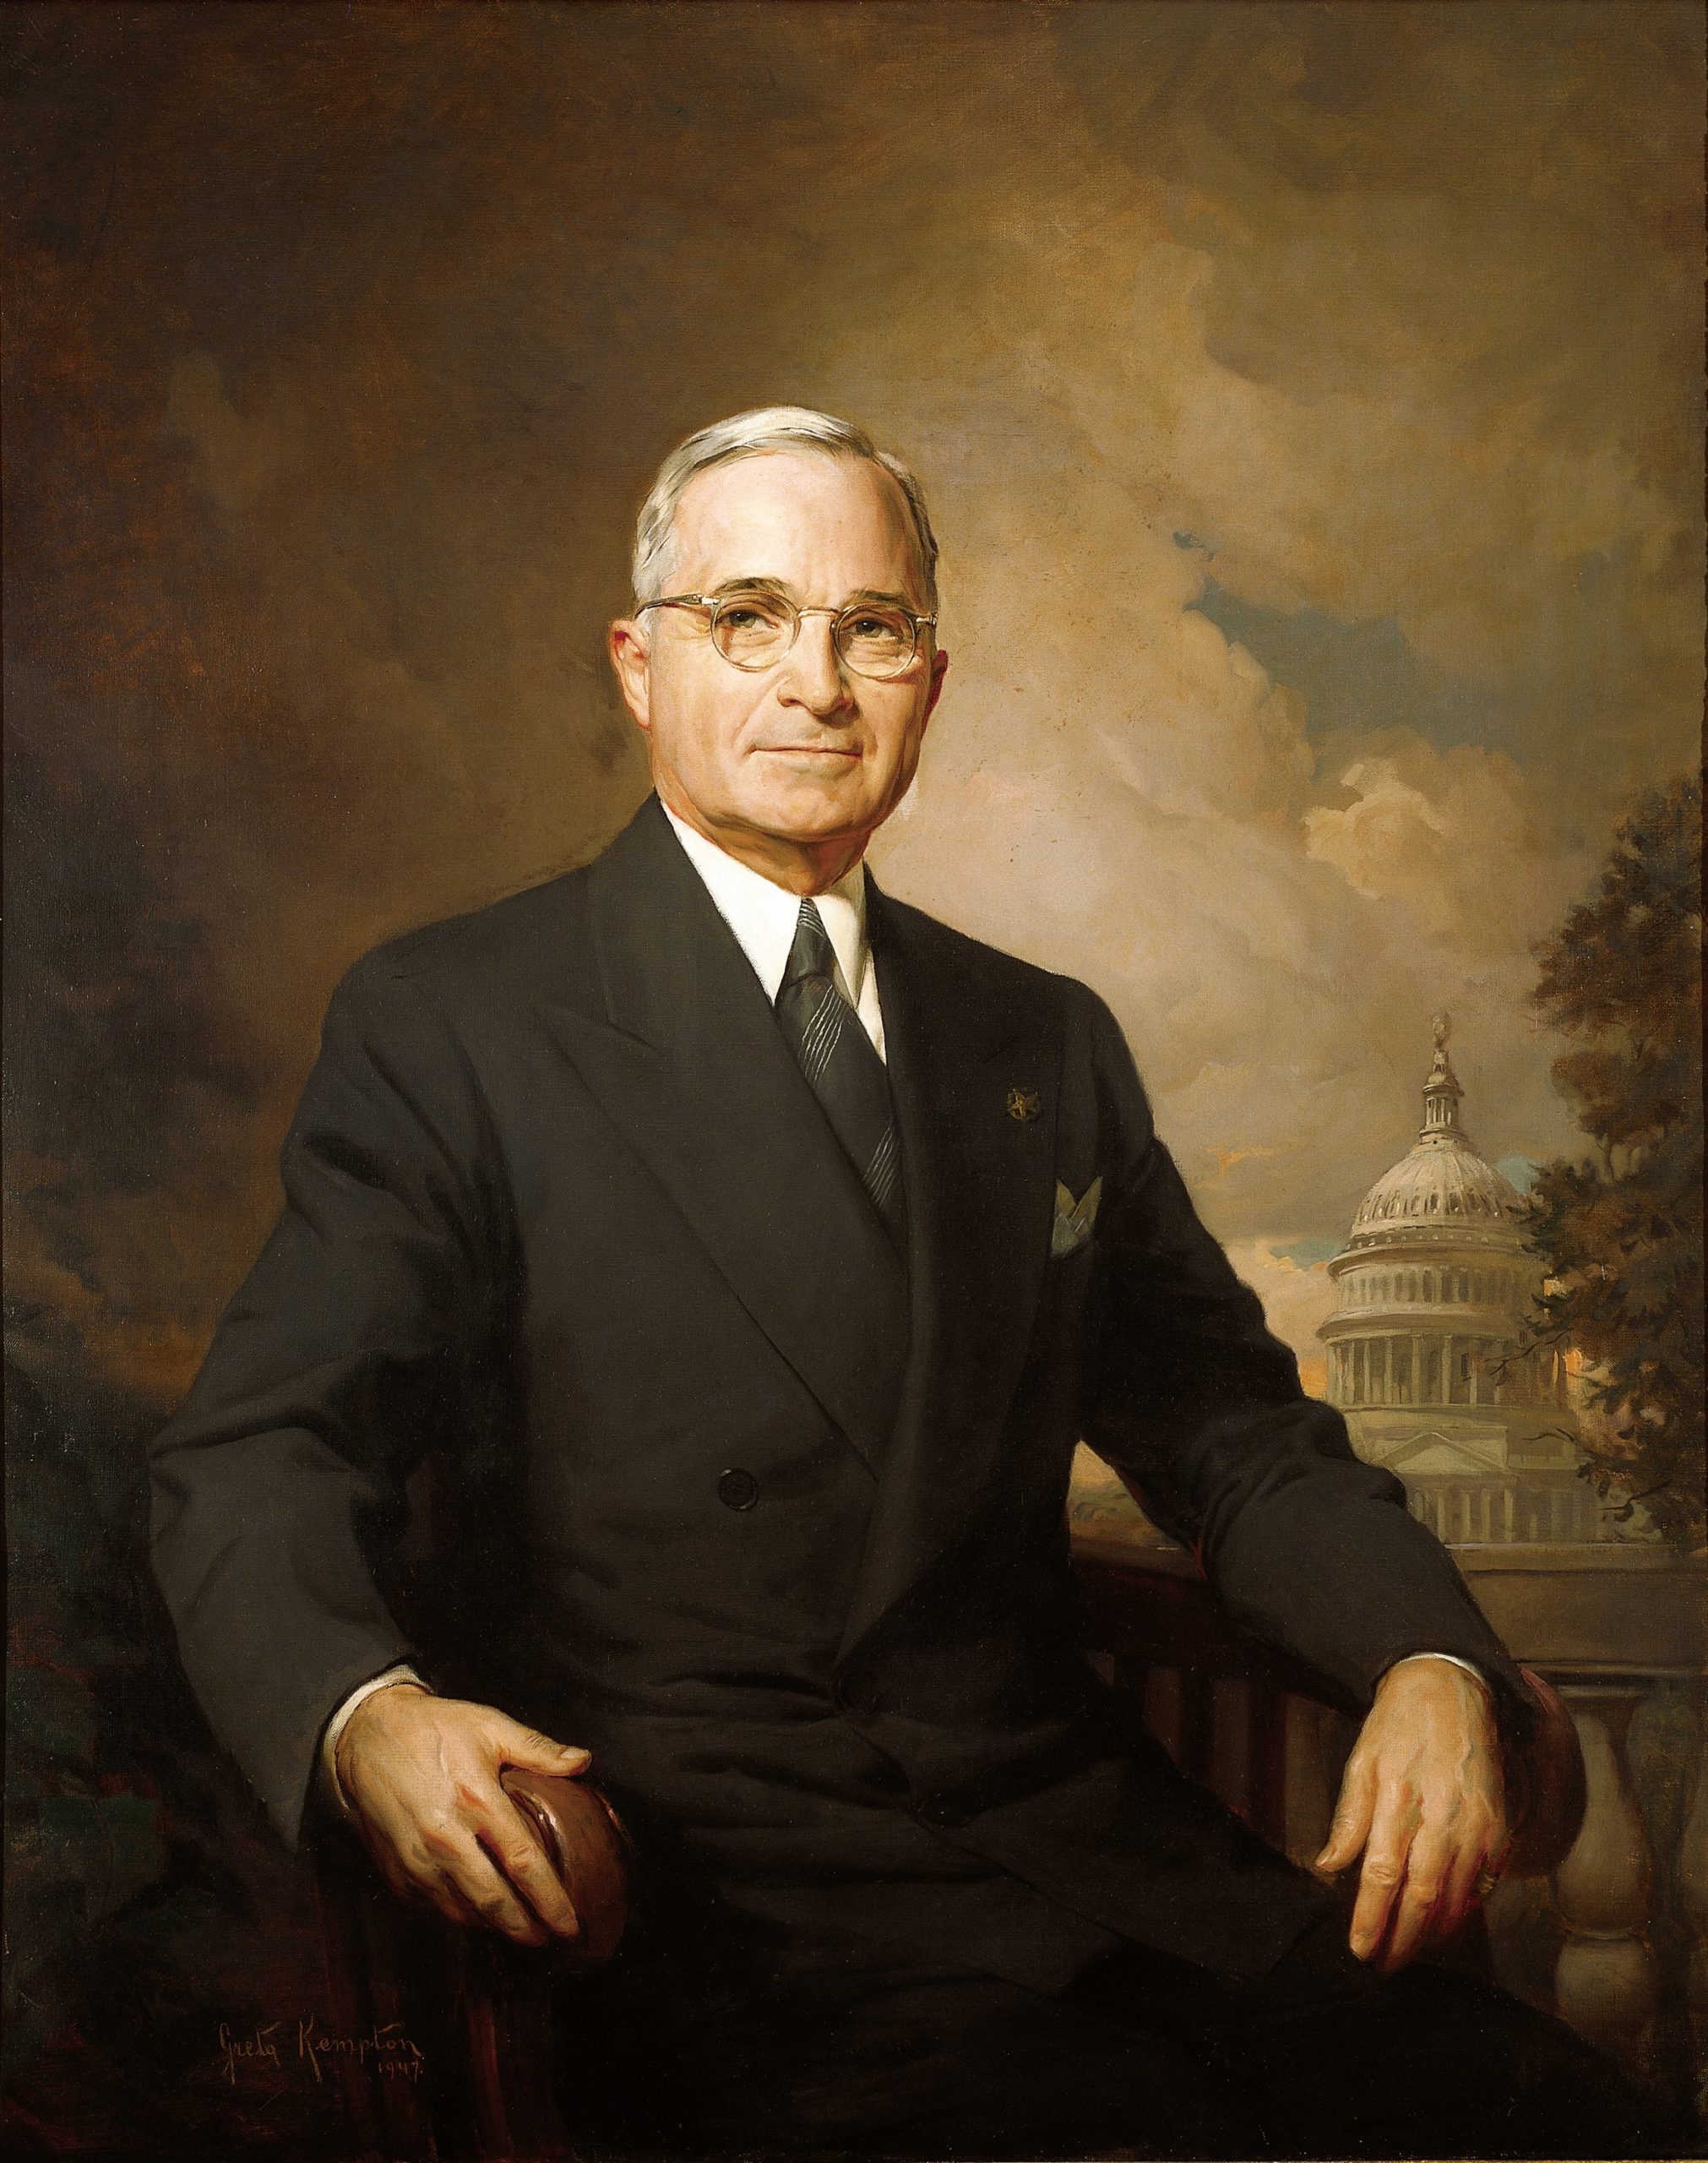 The Biography of Harry S. Truman